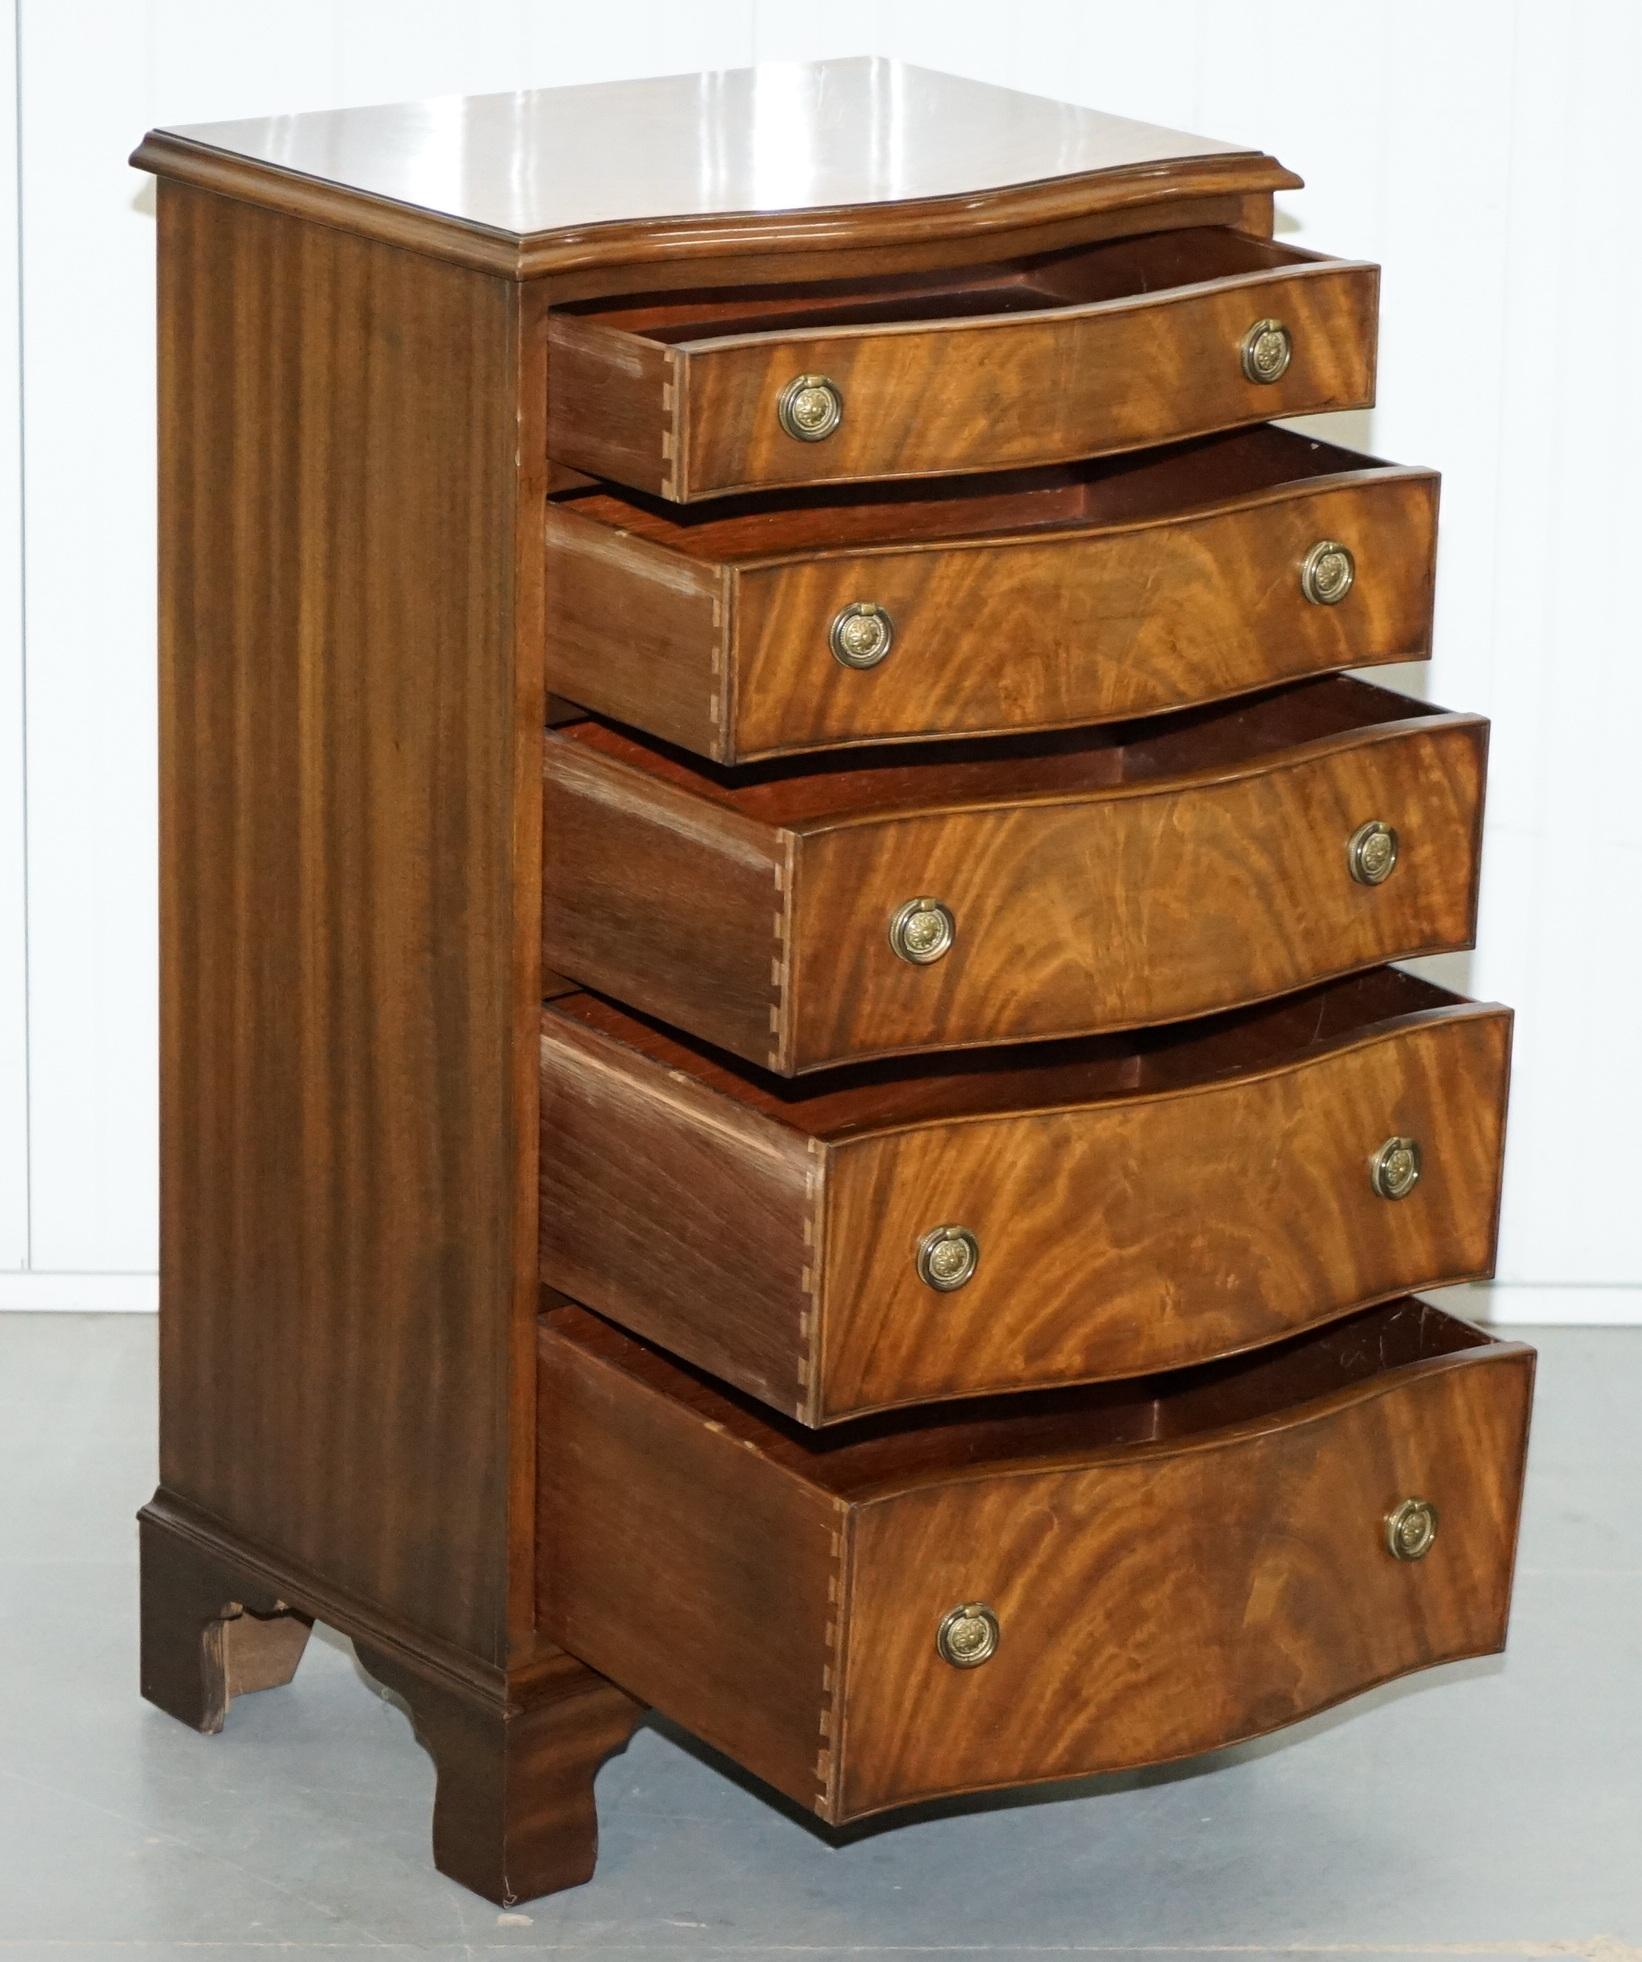 Nice Flamed Hardwood Bevan Funnell Serpentine Fronted Tall Boy Chest of Drawers 5